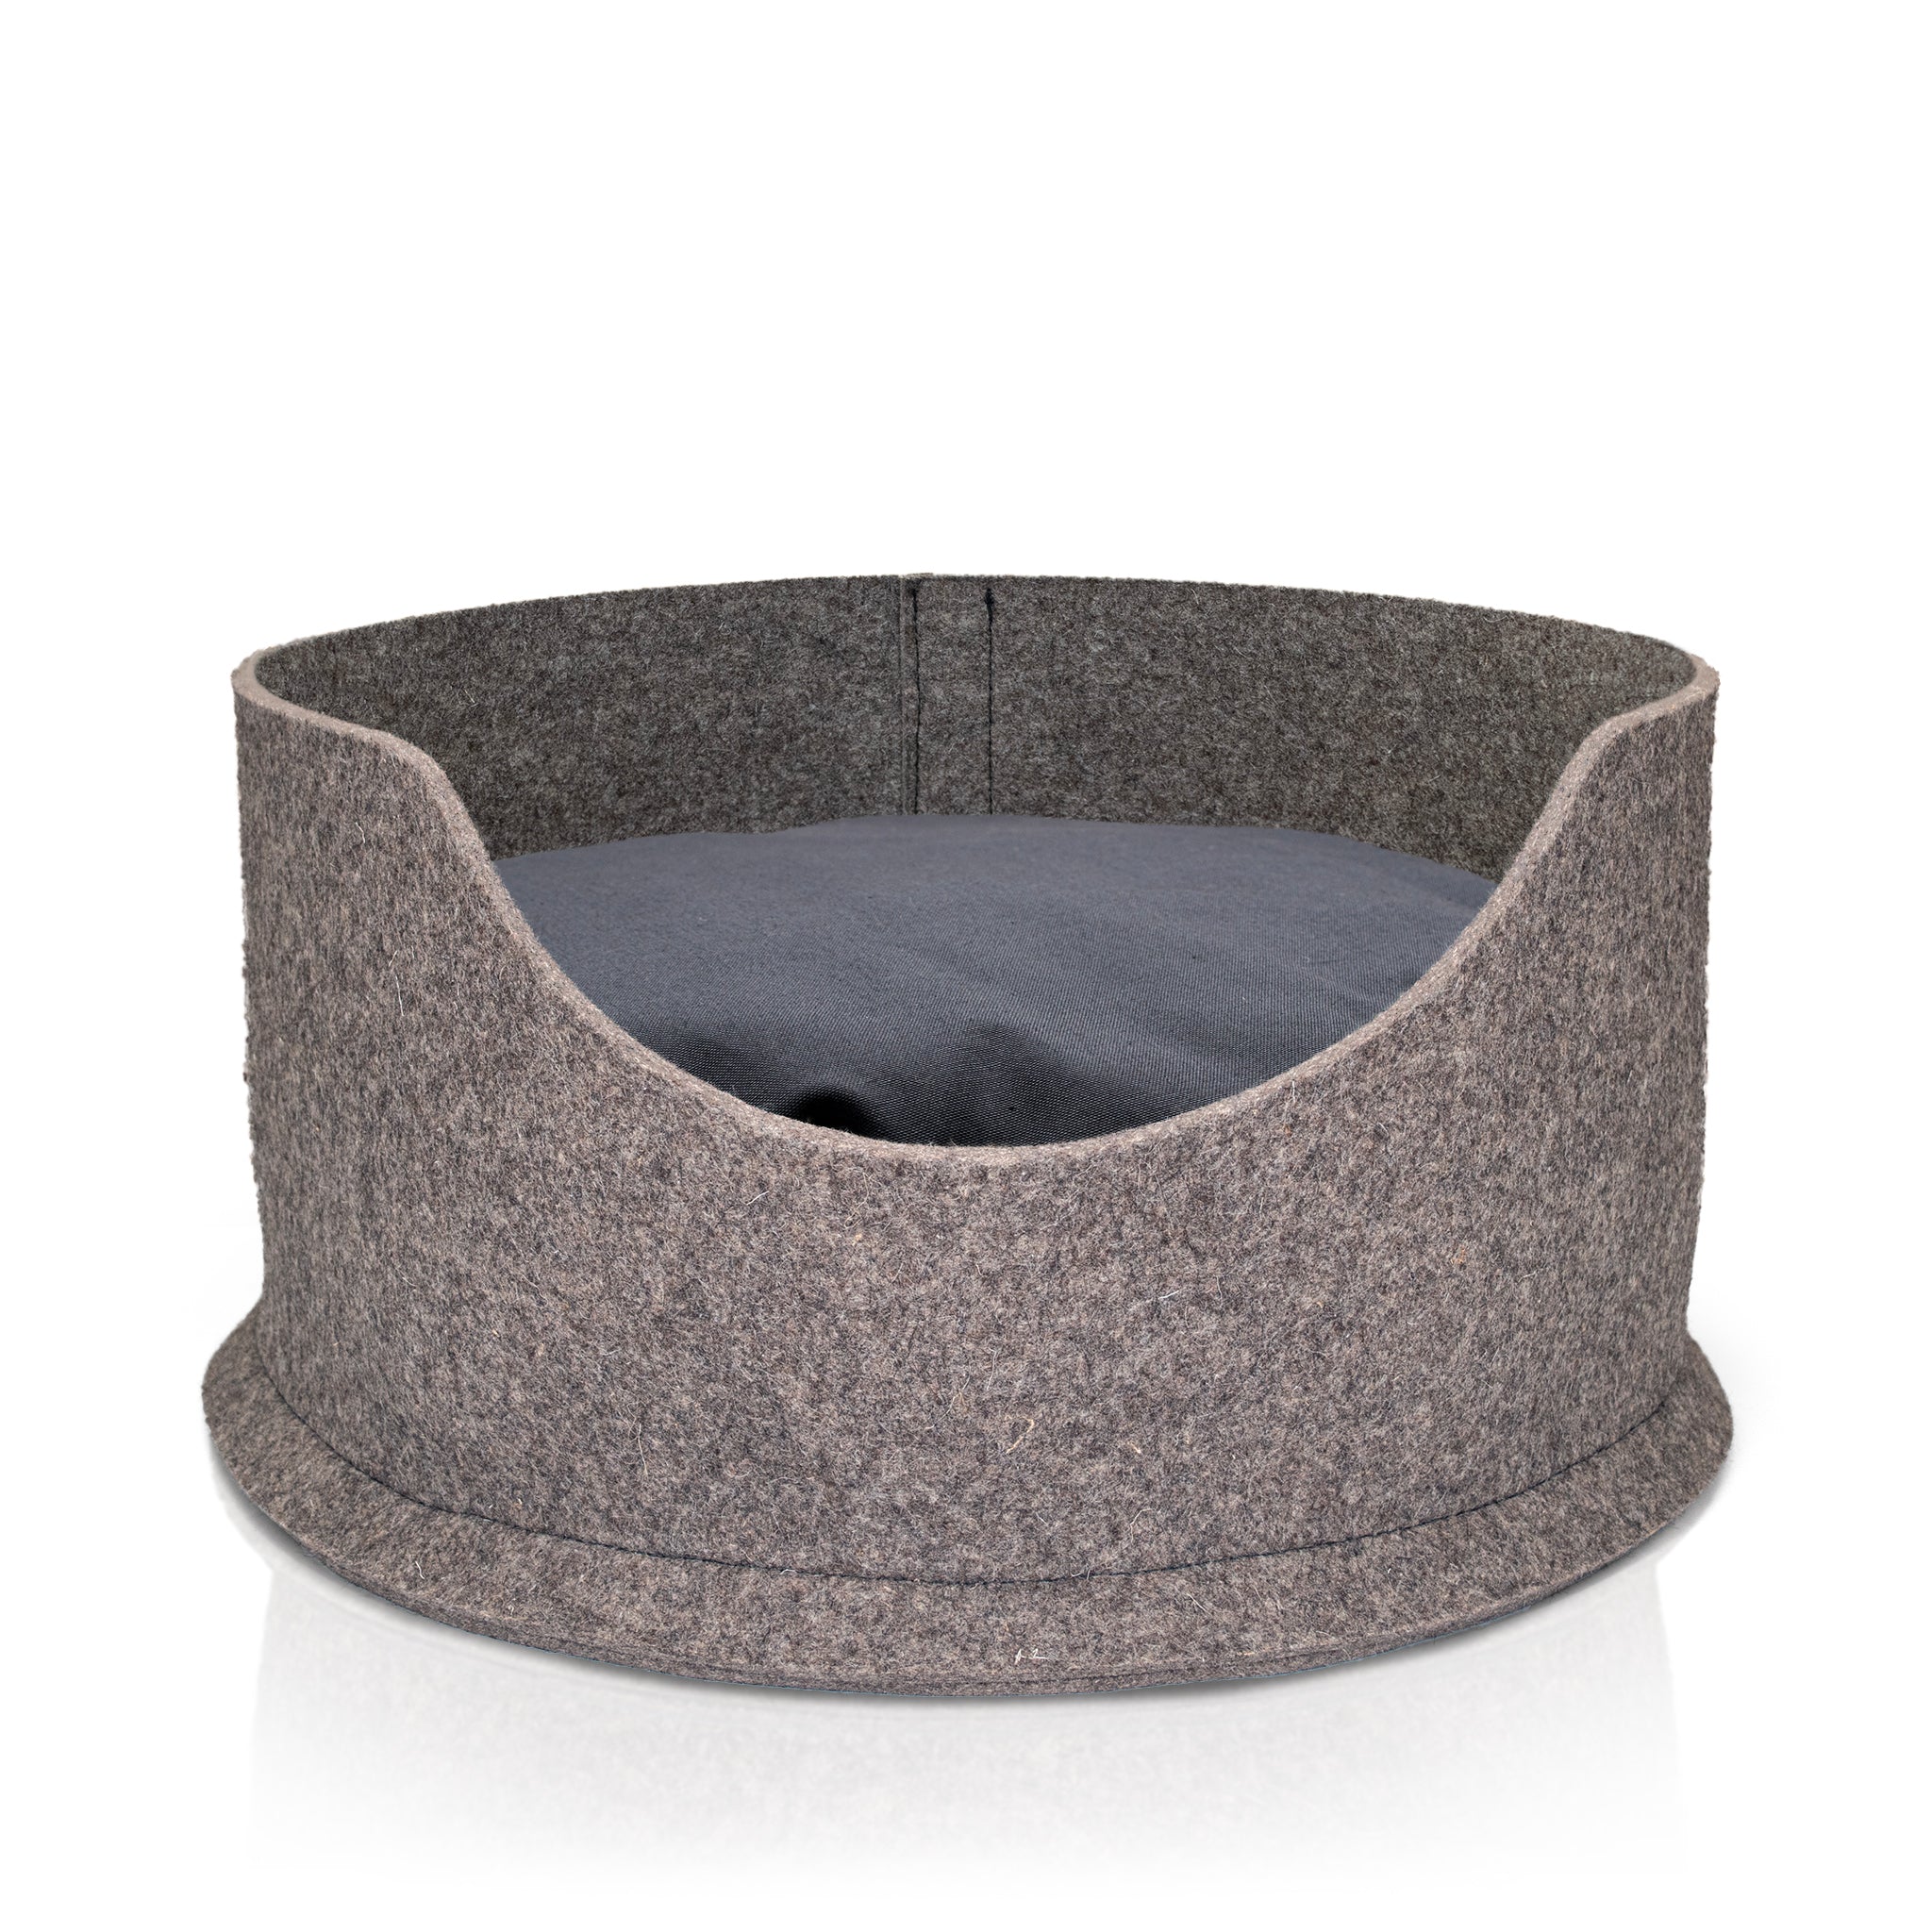 Handmade felt cat and dog bed by Chimney Sheep - with a large grey cushion